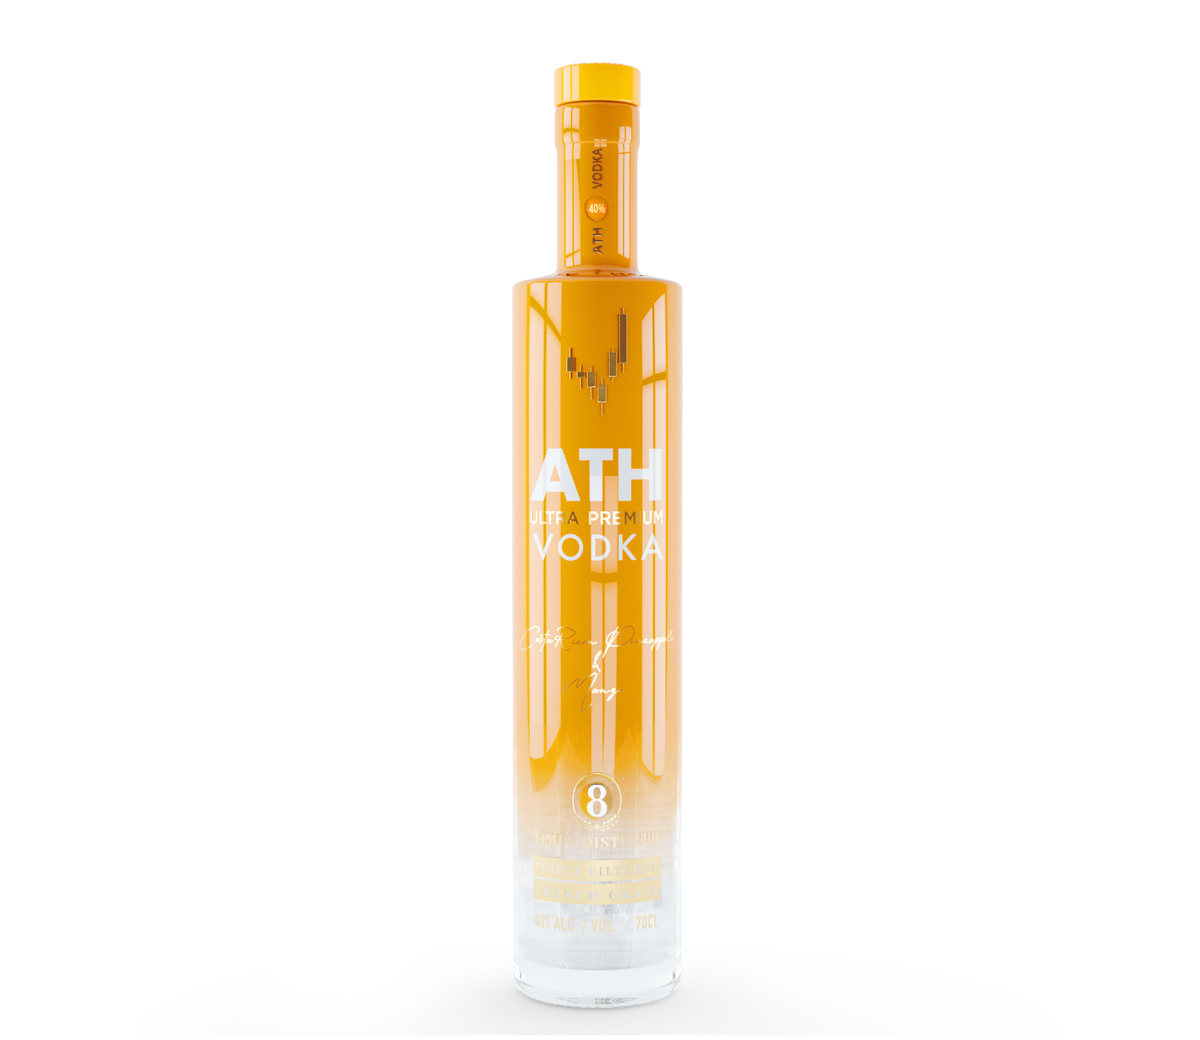 ATH Vodka is handcrafted and produced with the utmost care to ensure it meets the highest standards. We source the best quality French grain to create a truly exceptional ultra premium vodka with the smoothest finish.